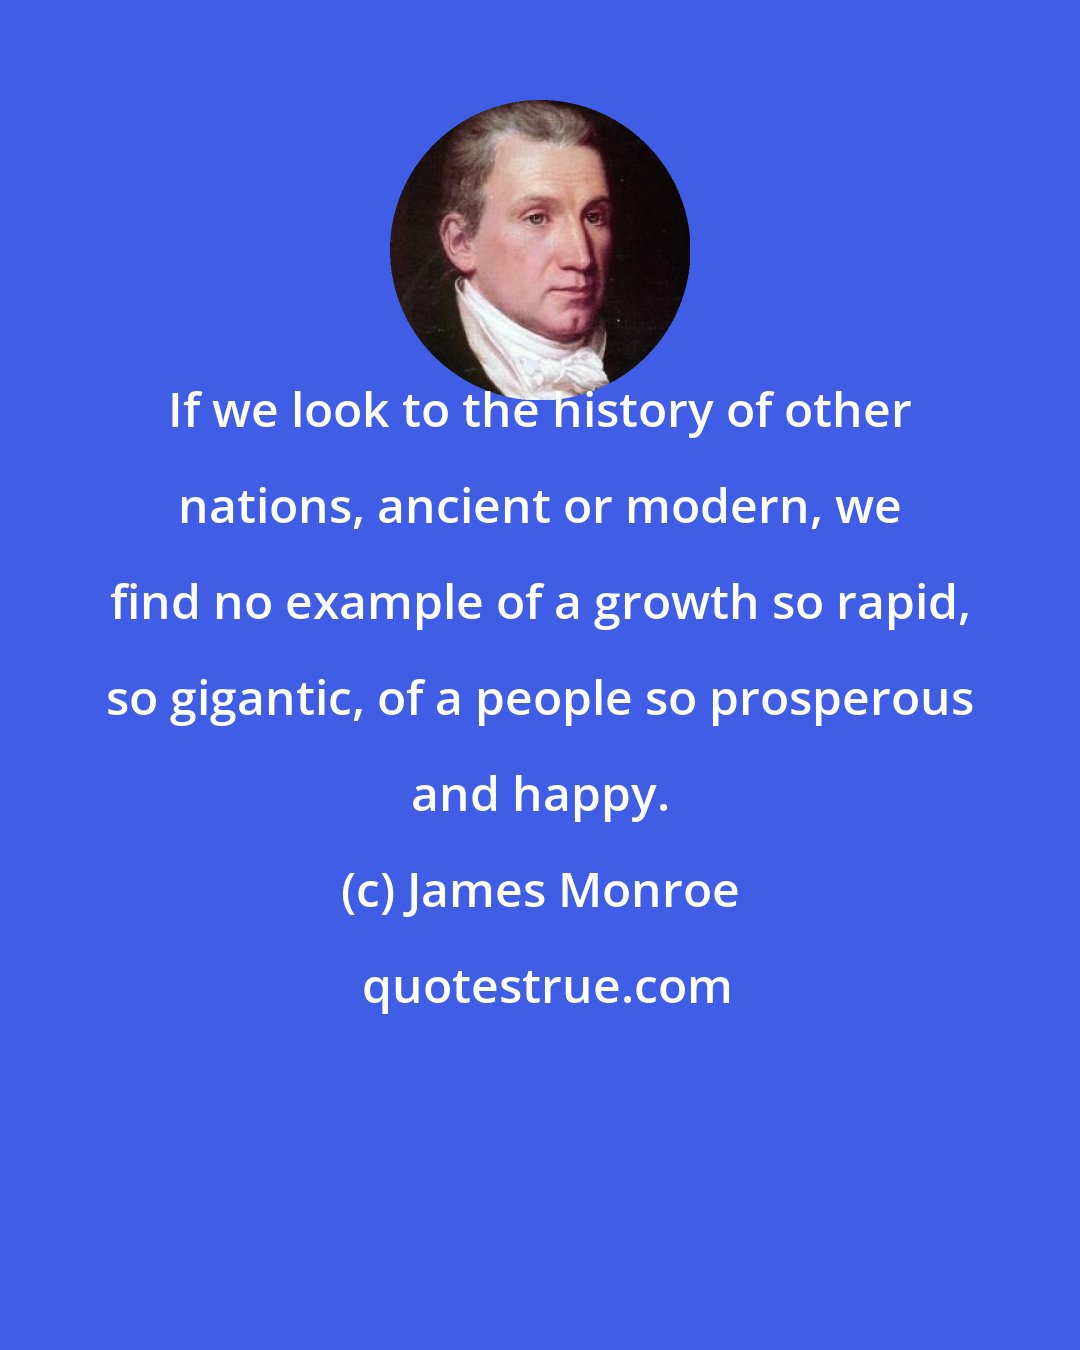 James Monroe: If we look to the history of other nations, ancient or modern, we find no example of a growth so rapid, so gigantic, of a people so prosperous and happy.